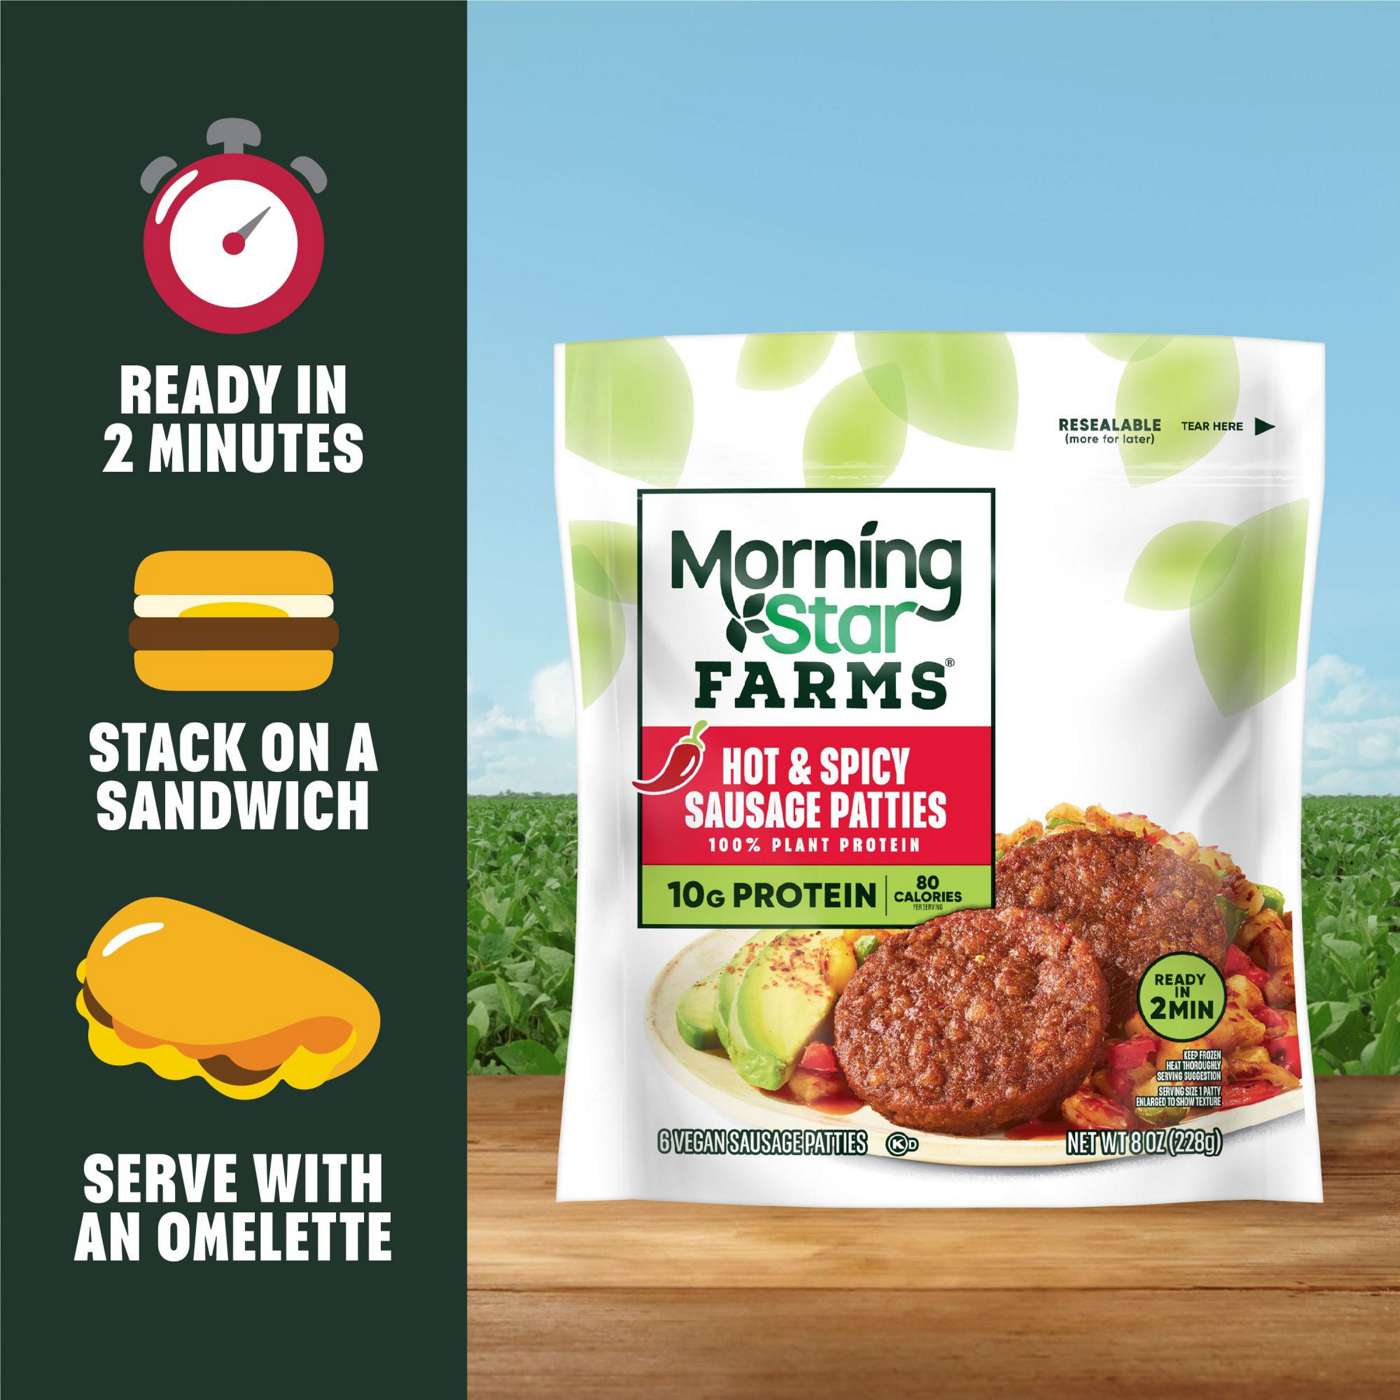 MorningStar Farms Veggie Breakfast Hot and Spicy Sausage Patties; image 2 of 4